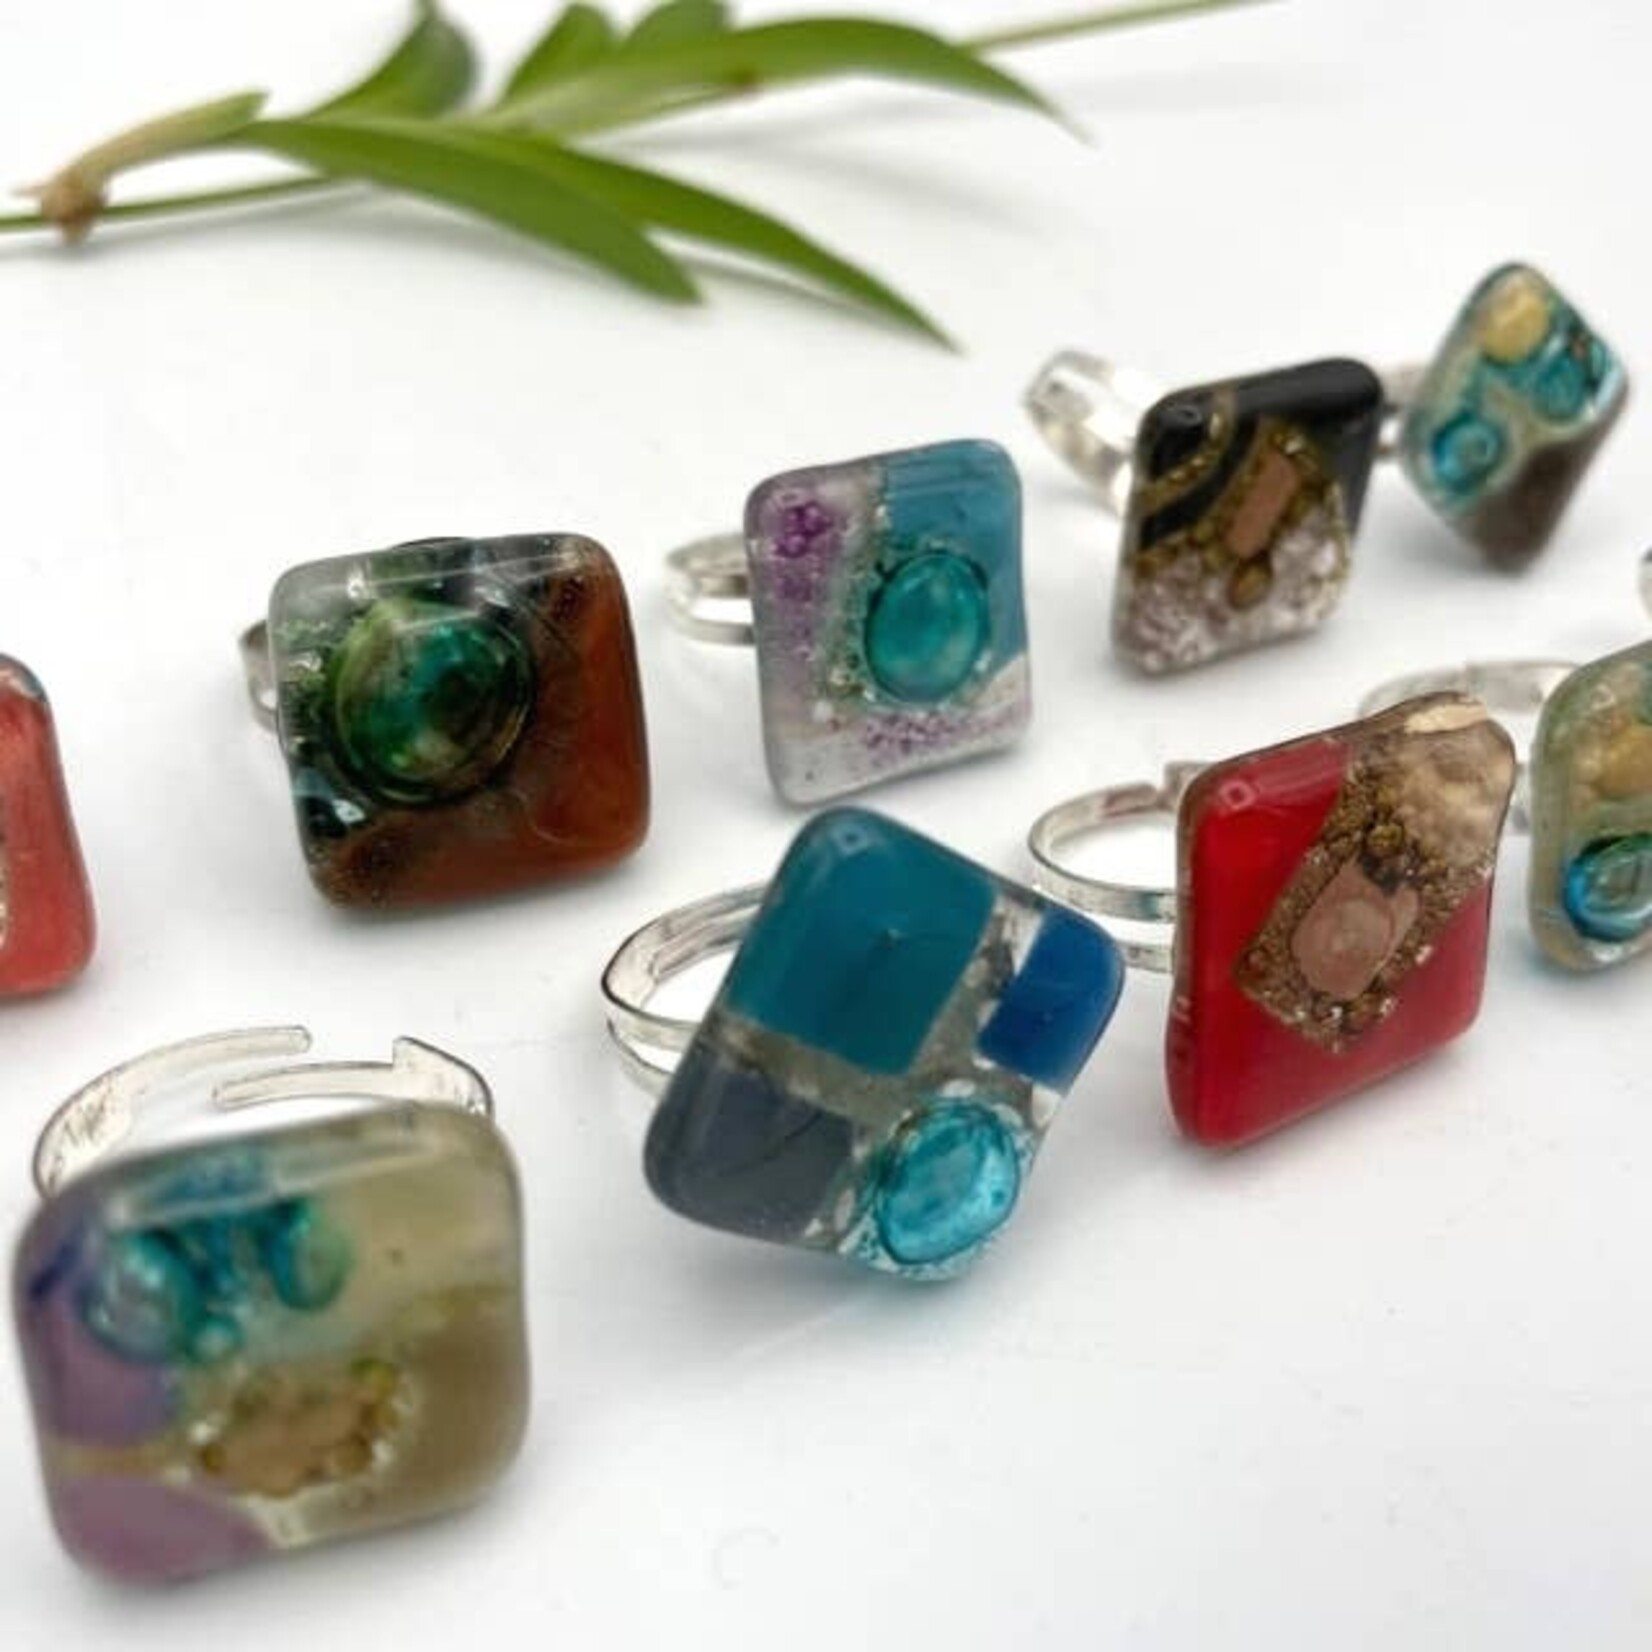 Women of the Cloud Forrest Adjustable Fused Glass Ring, Ecuador